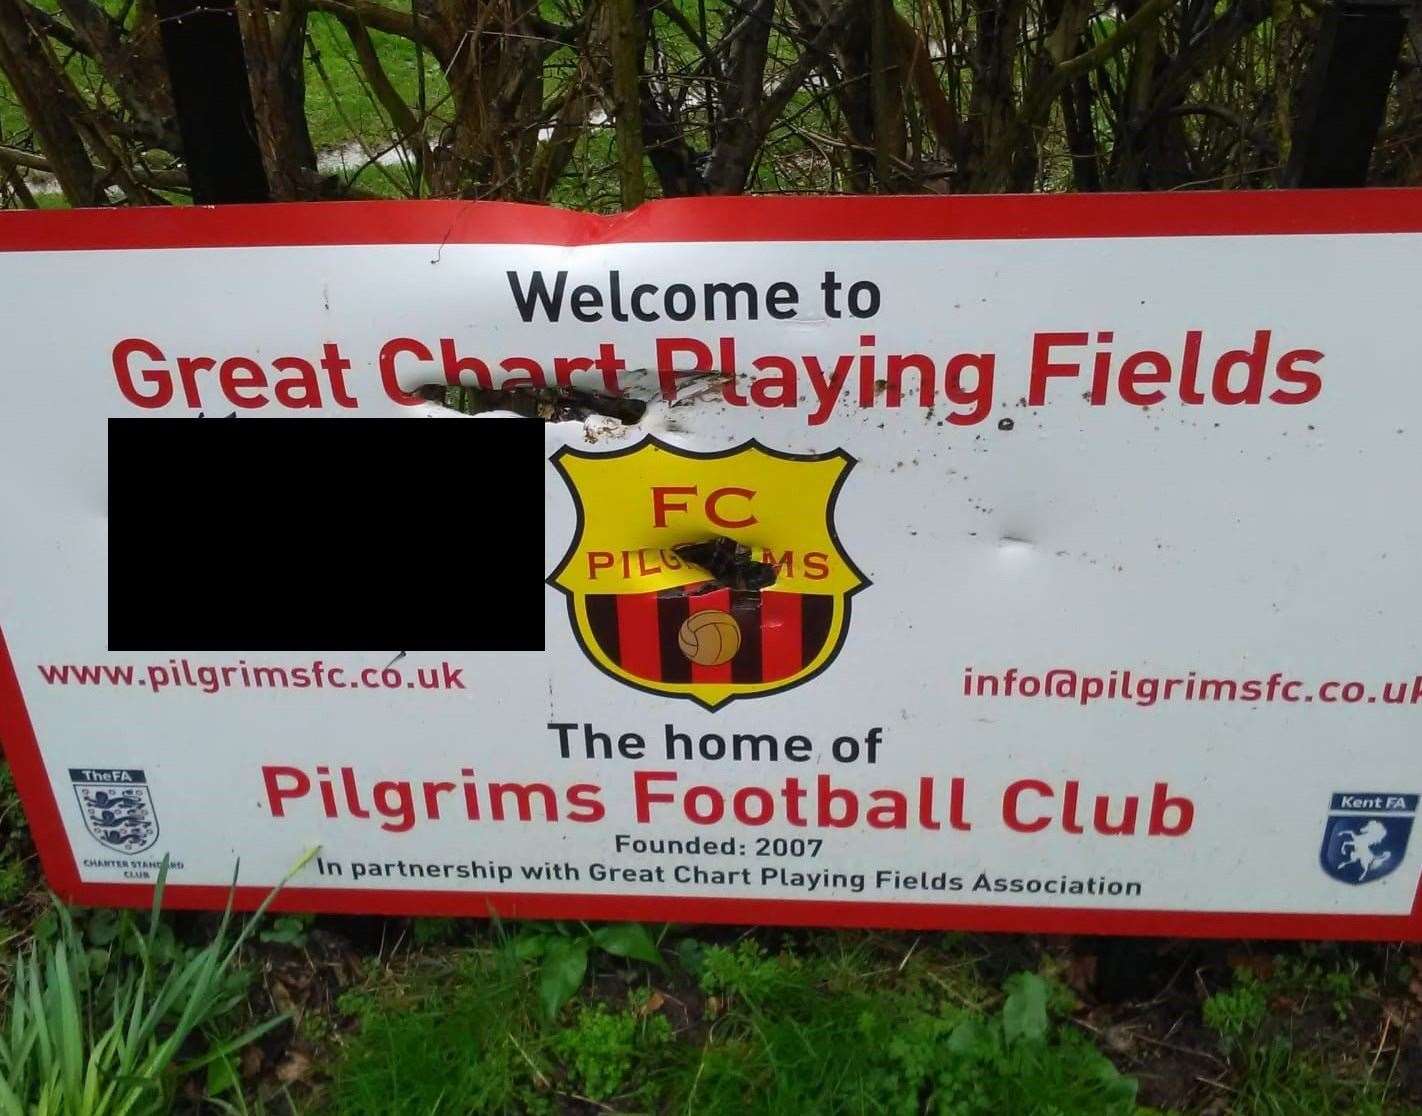 The Pilgrims FC sign was targeted by vandals. The slogan has been censored